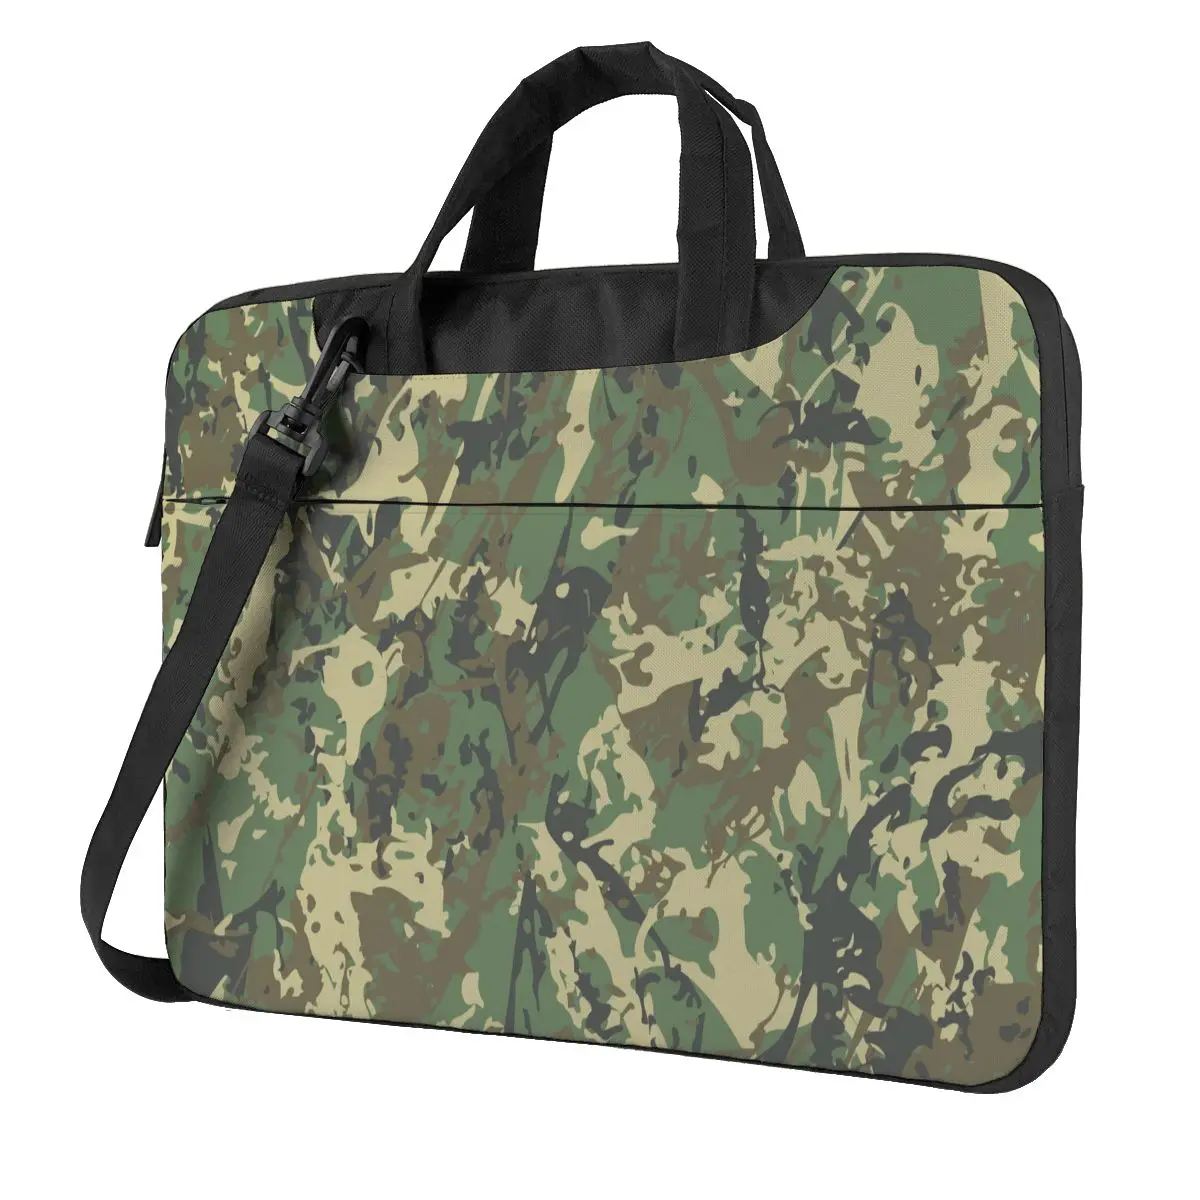 

Cool Military Camo Laptop Bag Camouflage Pattern For Macbook Air Pro Xiaomi Lenovo Asus Soft Waterproof Case 13 14 15 15.6 Pouch